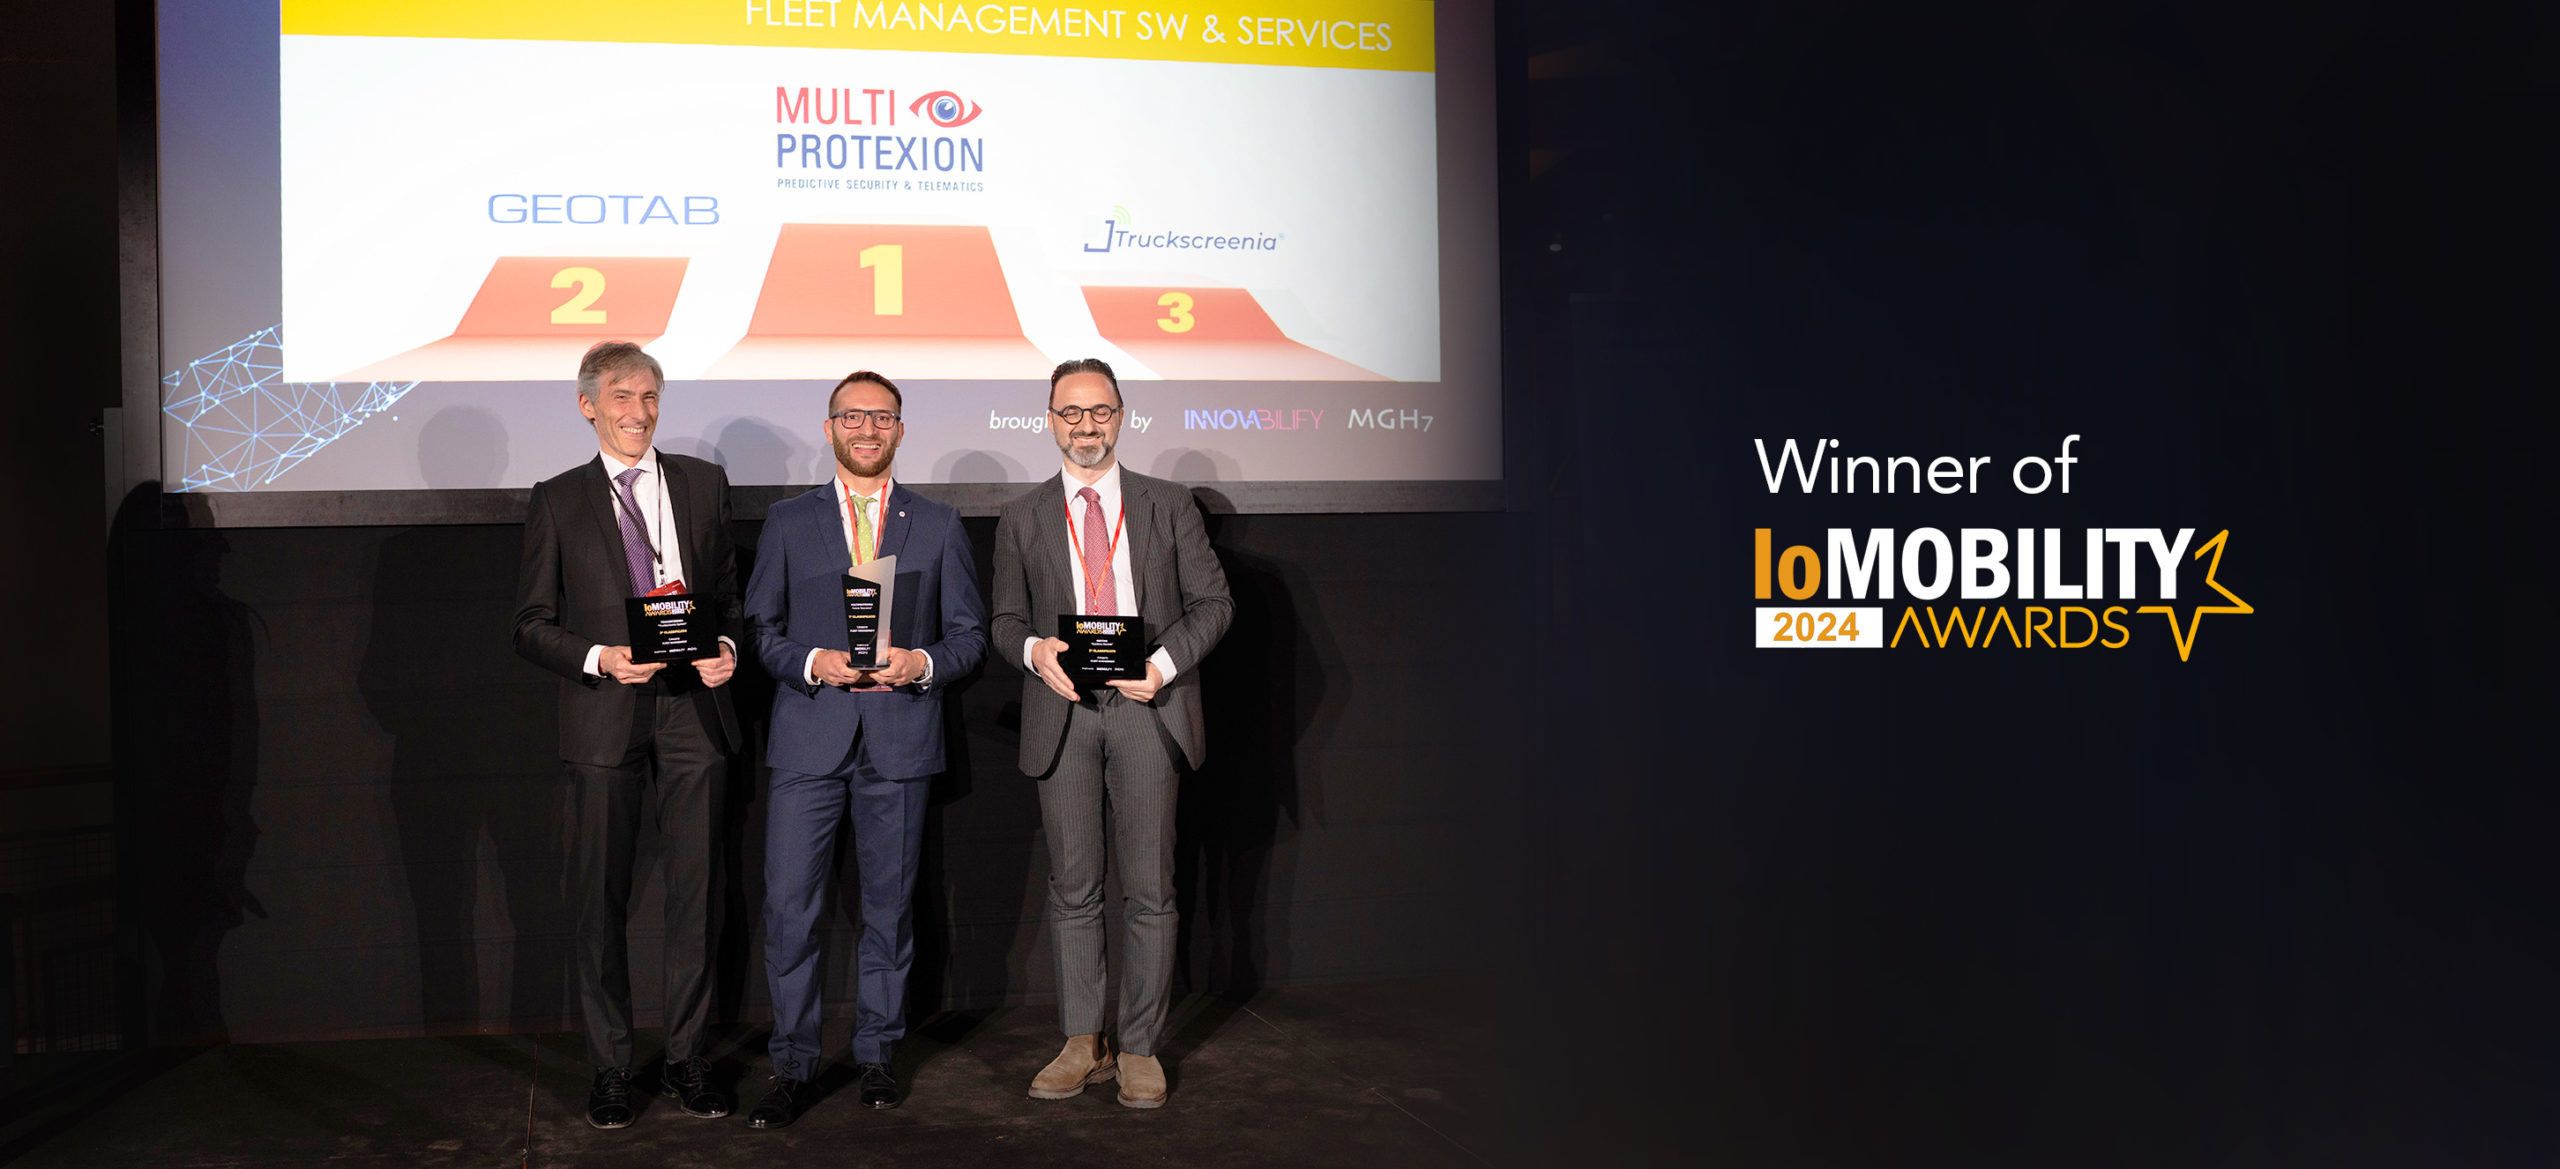 SIGNIFICANT ACHIEVEMENT FOR MULTIPROTEXION: FIRST PRIZE AT IOMOBILITY AWARDS WITH TELEMATICS ESCORT® SERVICE